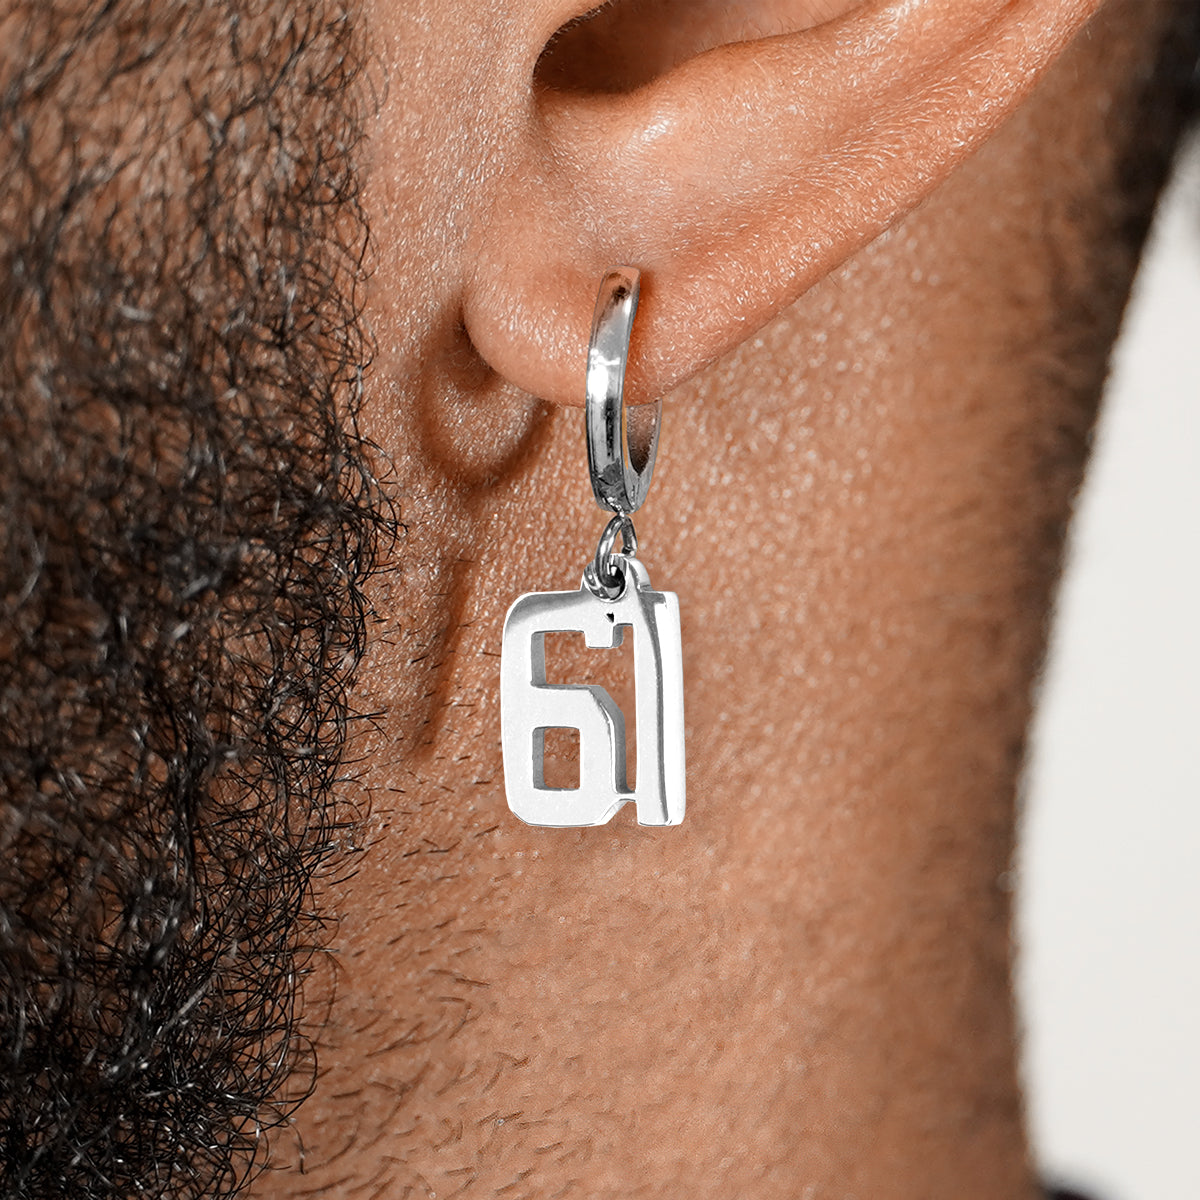 61 Number Earring - Stainless Steel